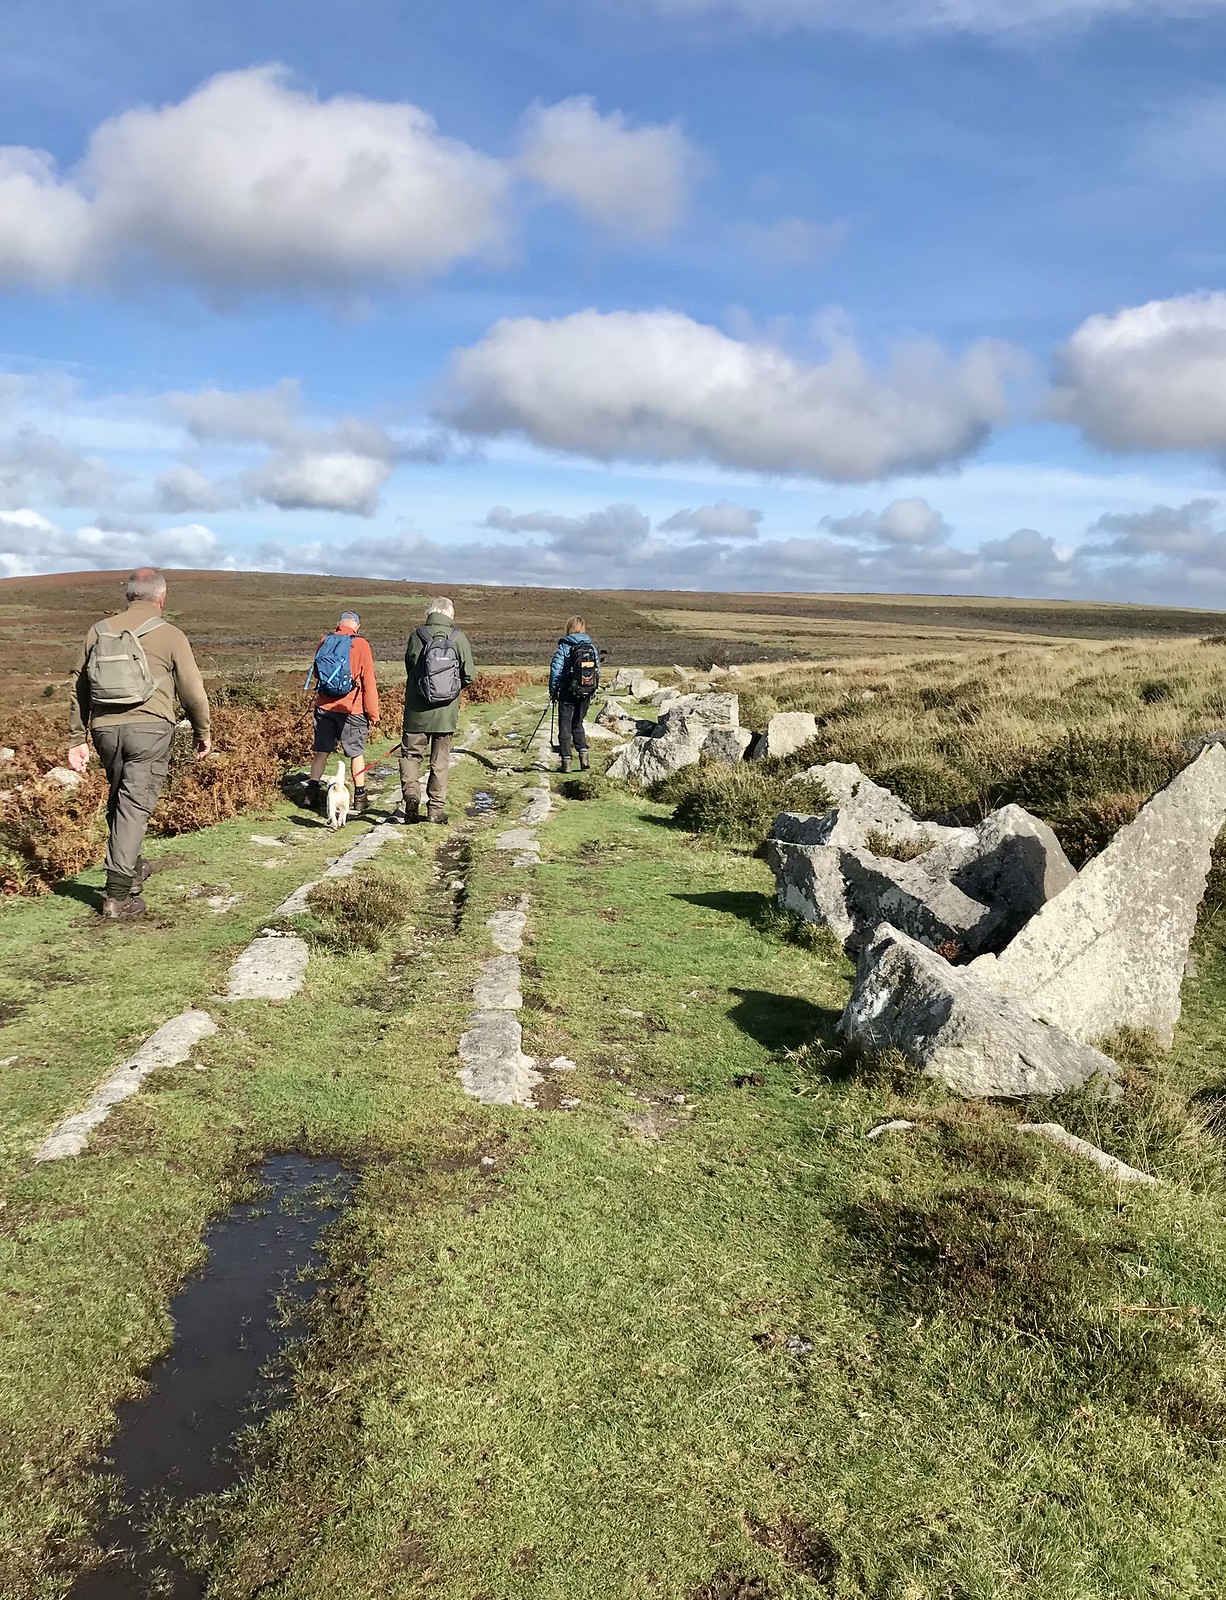 The Templer Way, granite rail track dating to 1790